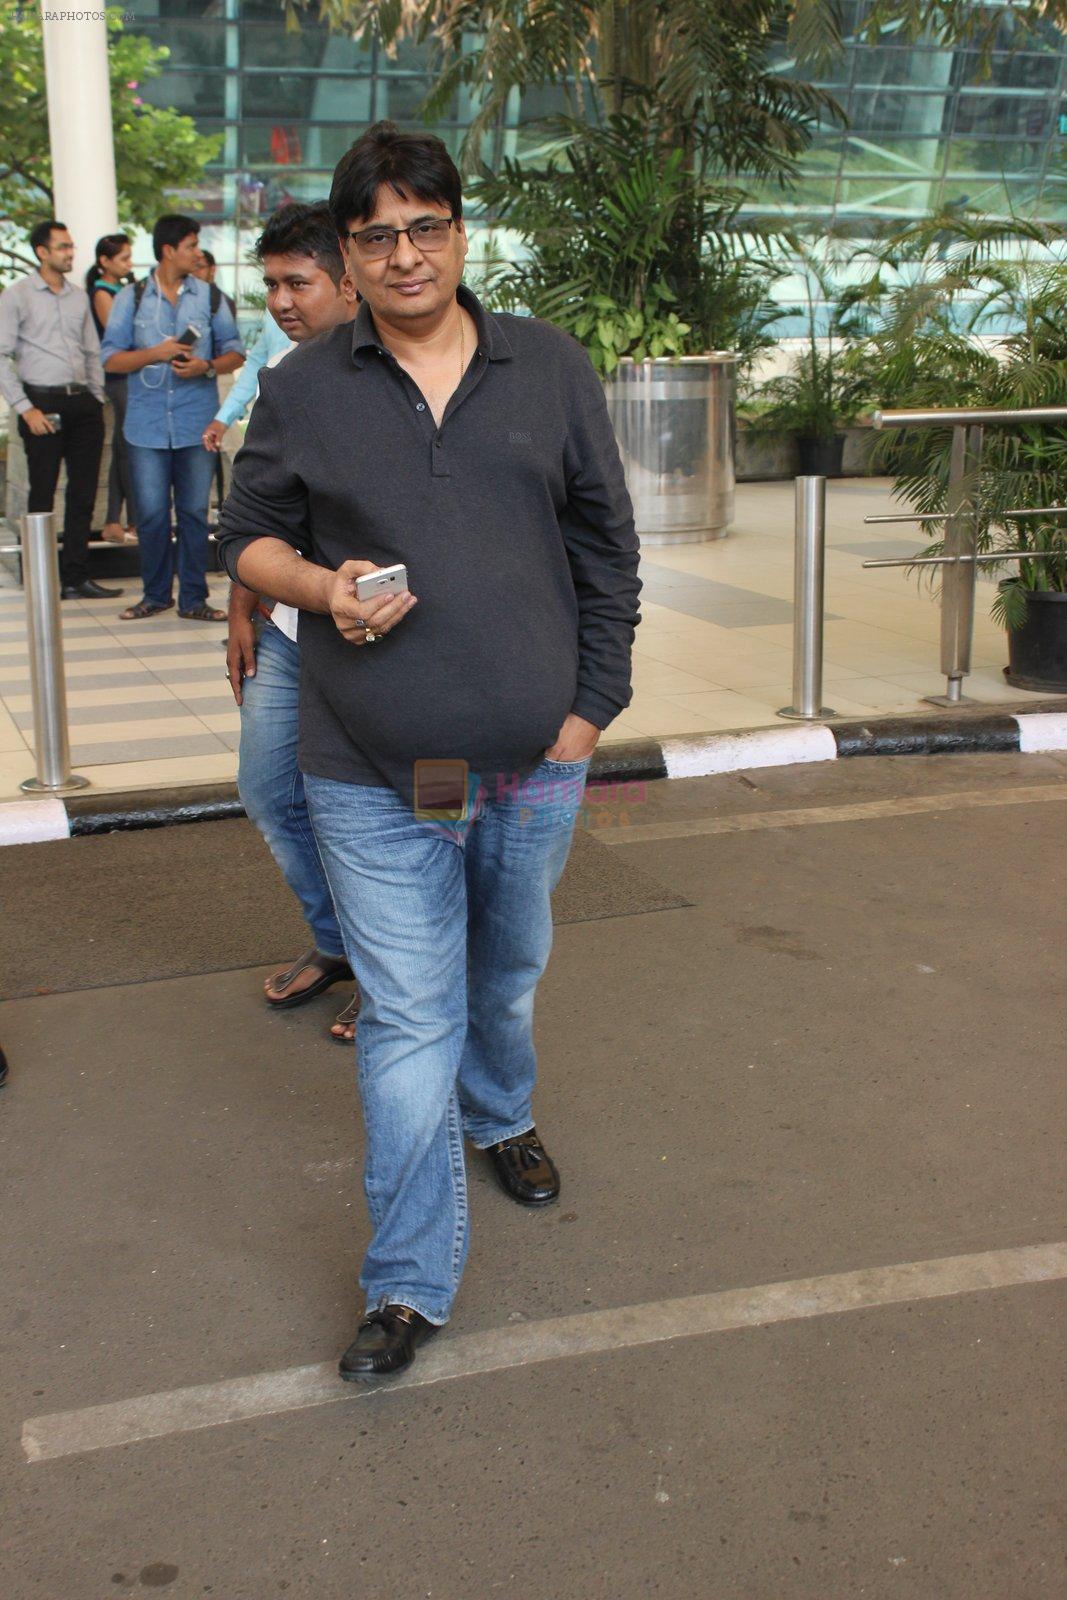 Vashu Bhagnani snapped at airport on 1st March 2016